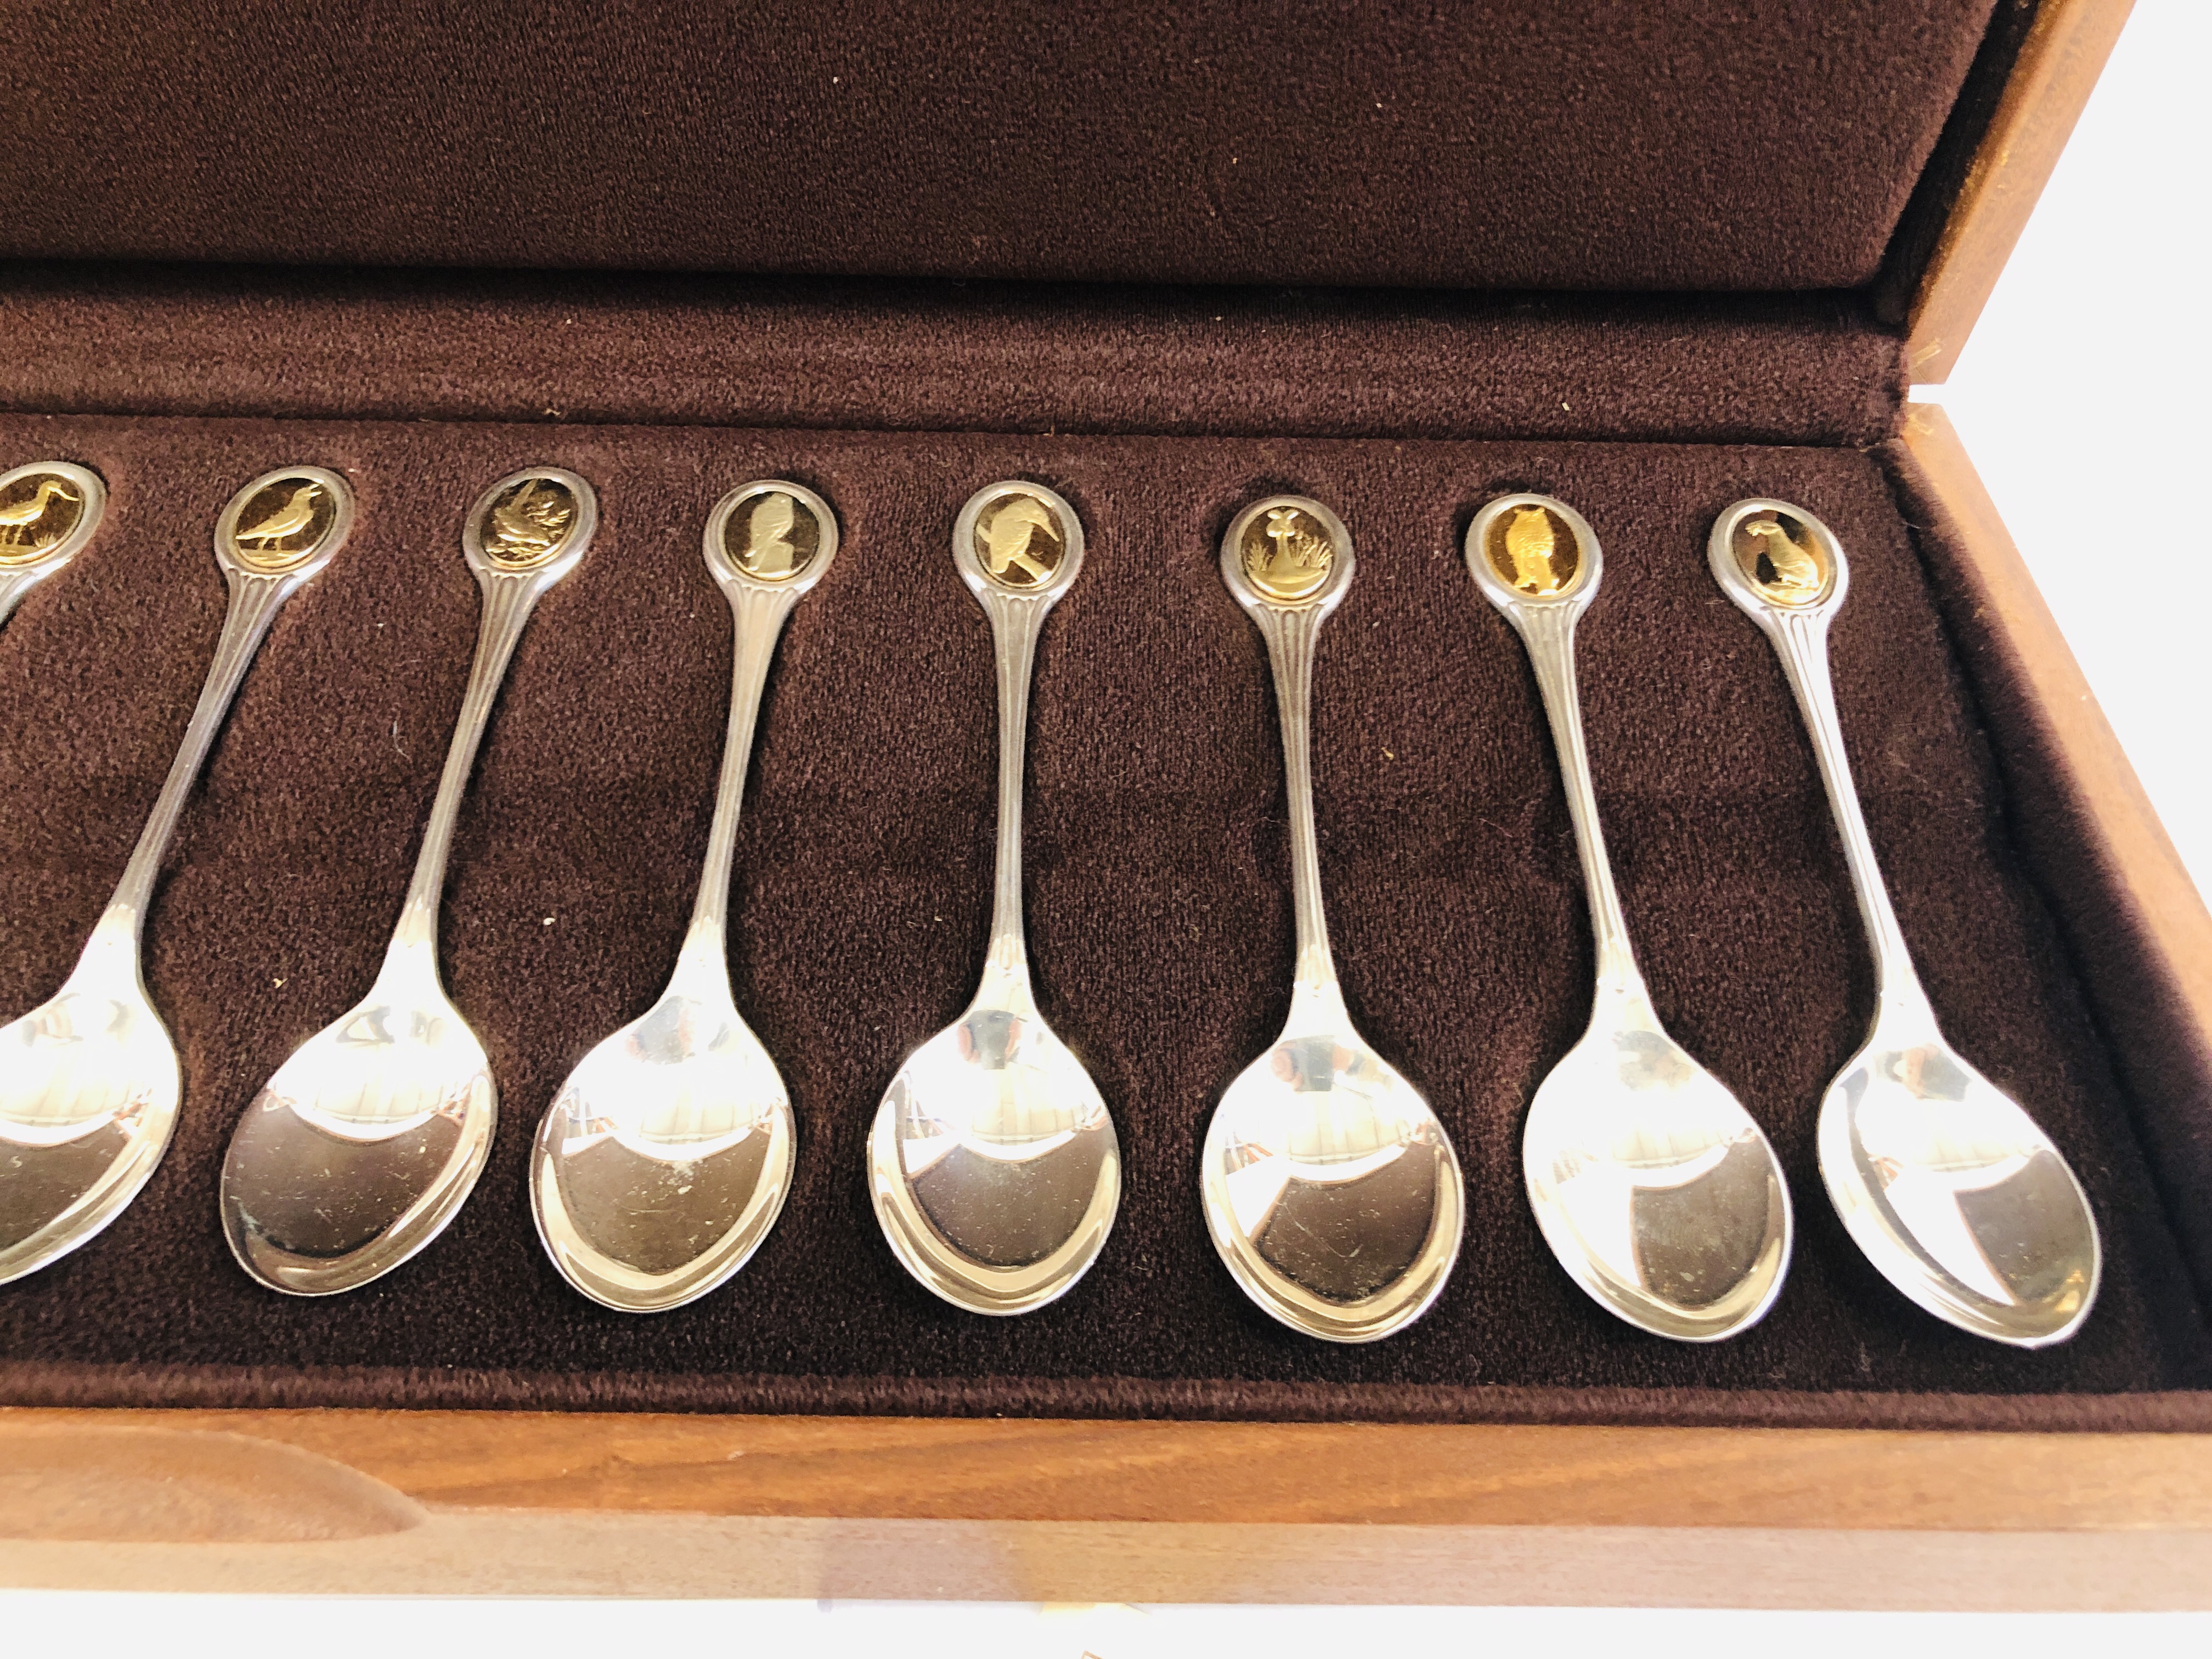 AN RSPB SILVER SPOON COLLECTION, J PINCHES LON 1975, 12 SPOONS. - Image 3 of 11